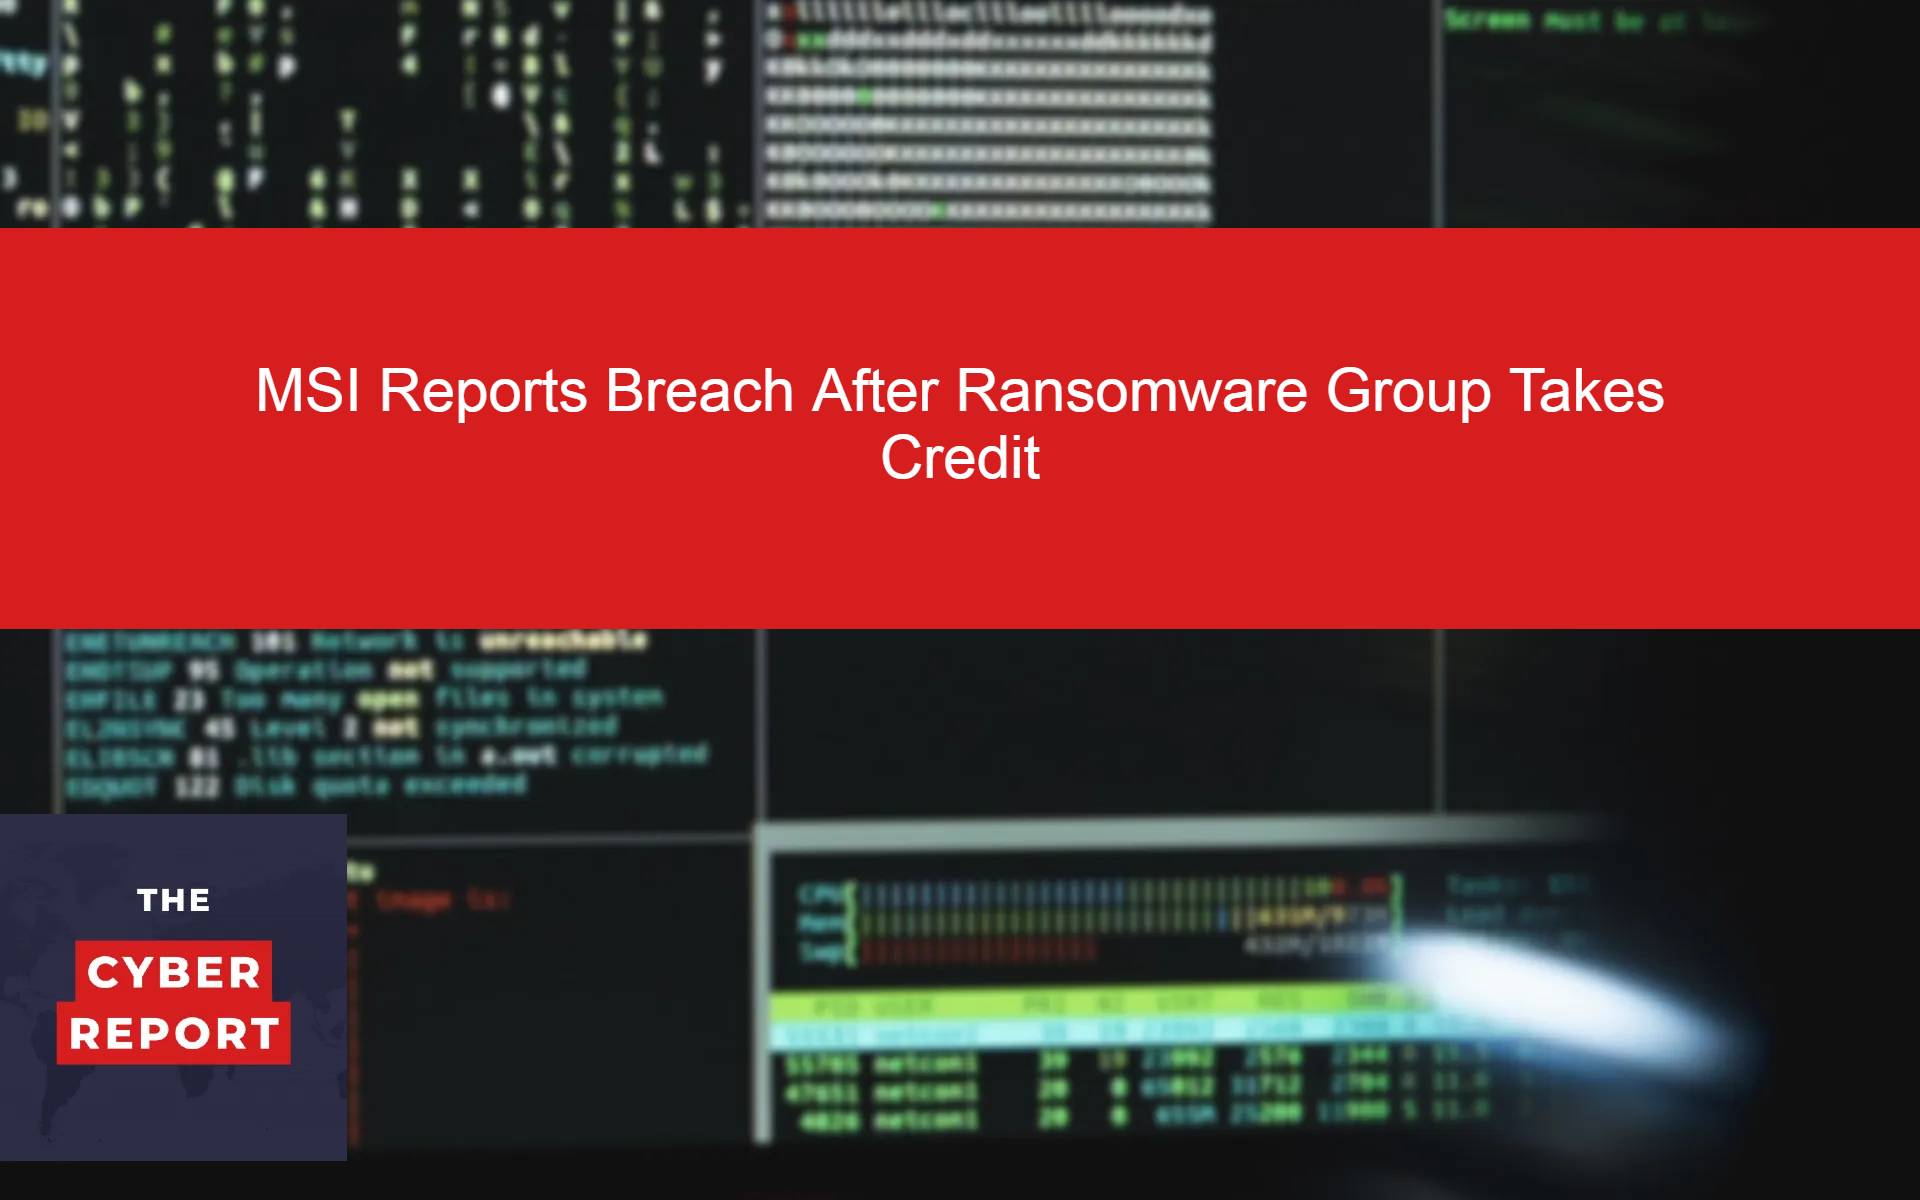 MSI Reports Breach After Ransomware Group Takes Credit